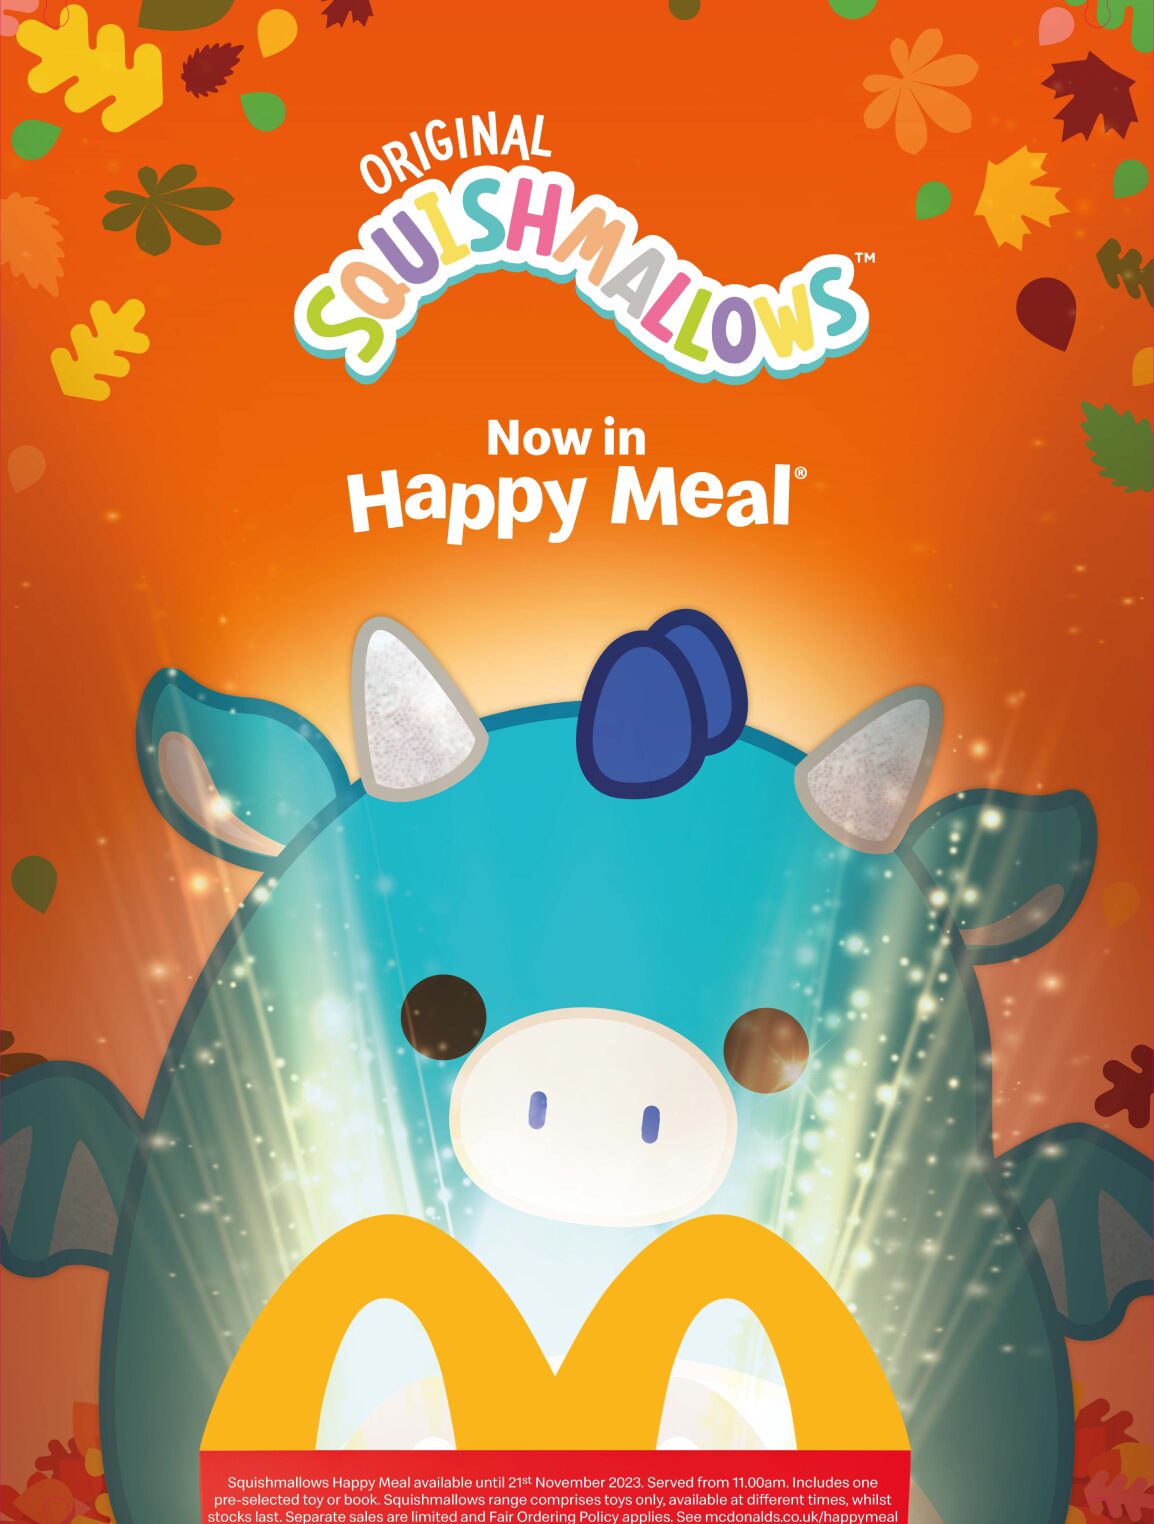 A Squishmallow opening the Happy Meal box revealing the magic inside